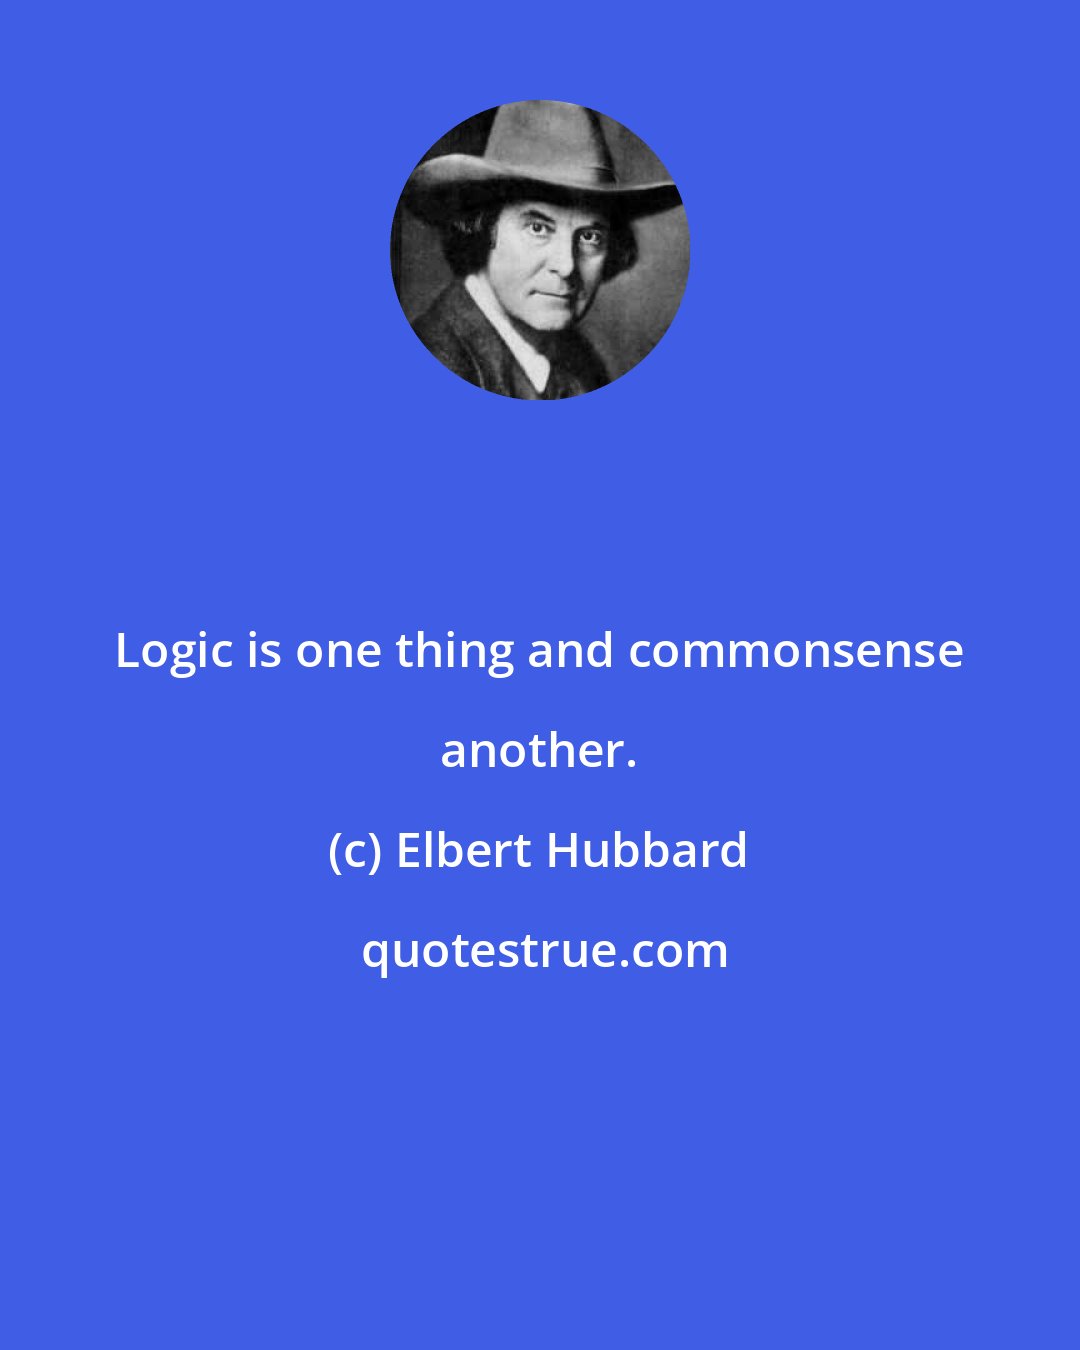 Elbert Hubbard: Logic is one thing and commonsense another.